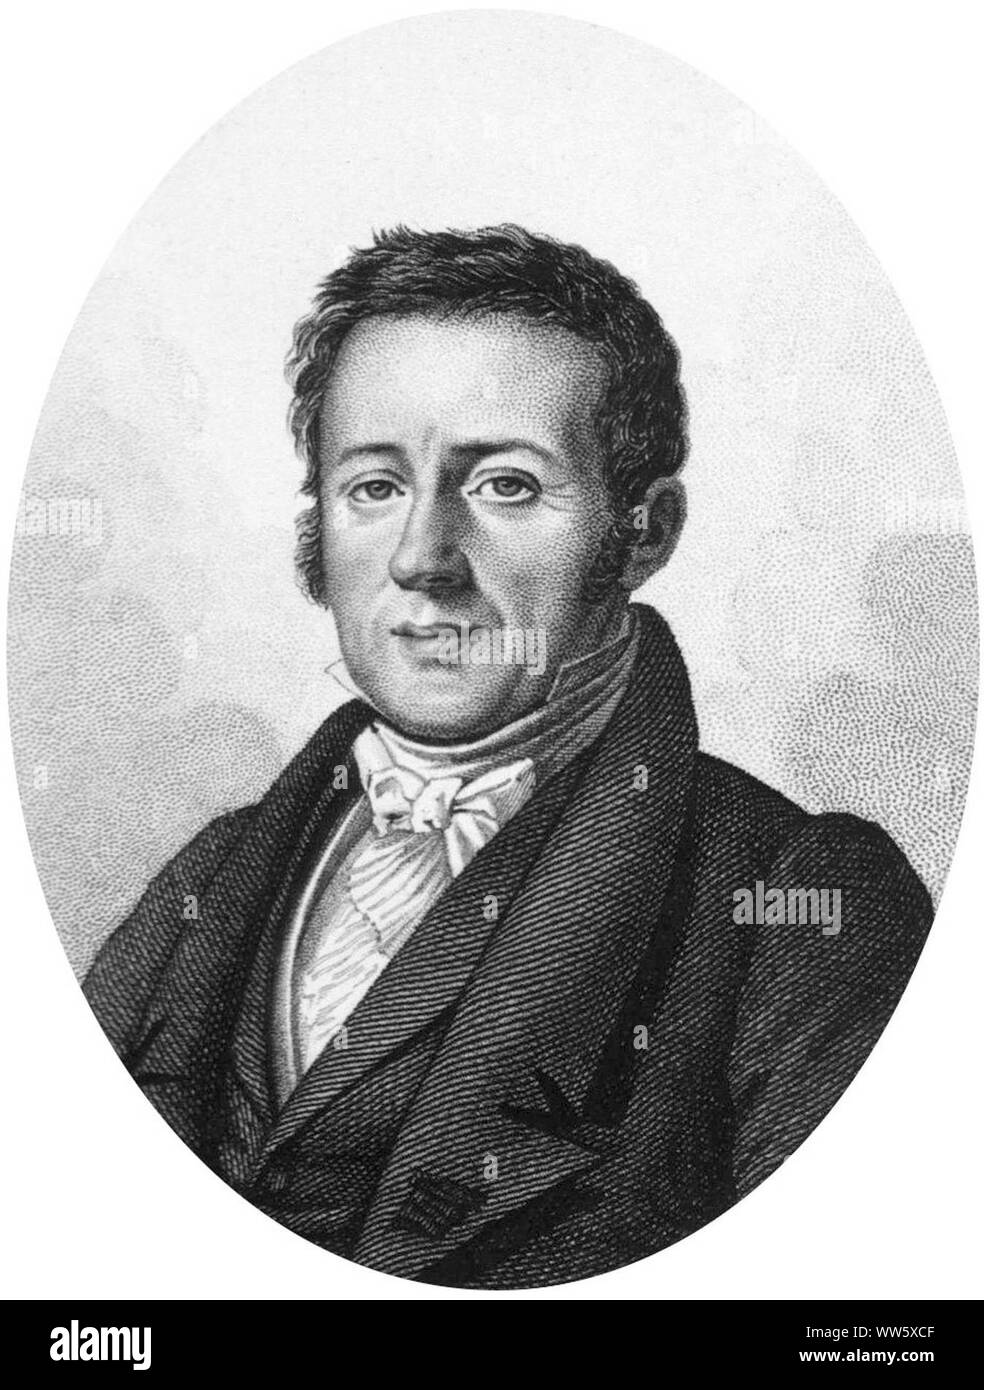 René Primevère Lesson (20 March 1794 – 28 April 1849) was a French surgeon, naturalist, ornithologist, and herpetologist. Stock Photo